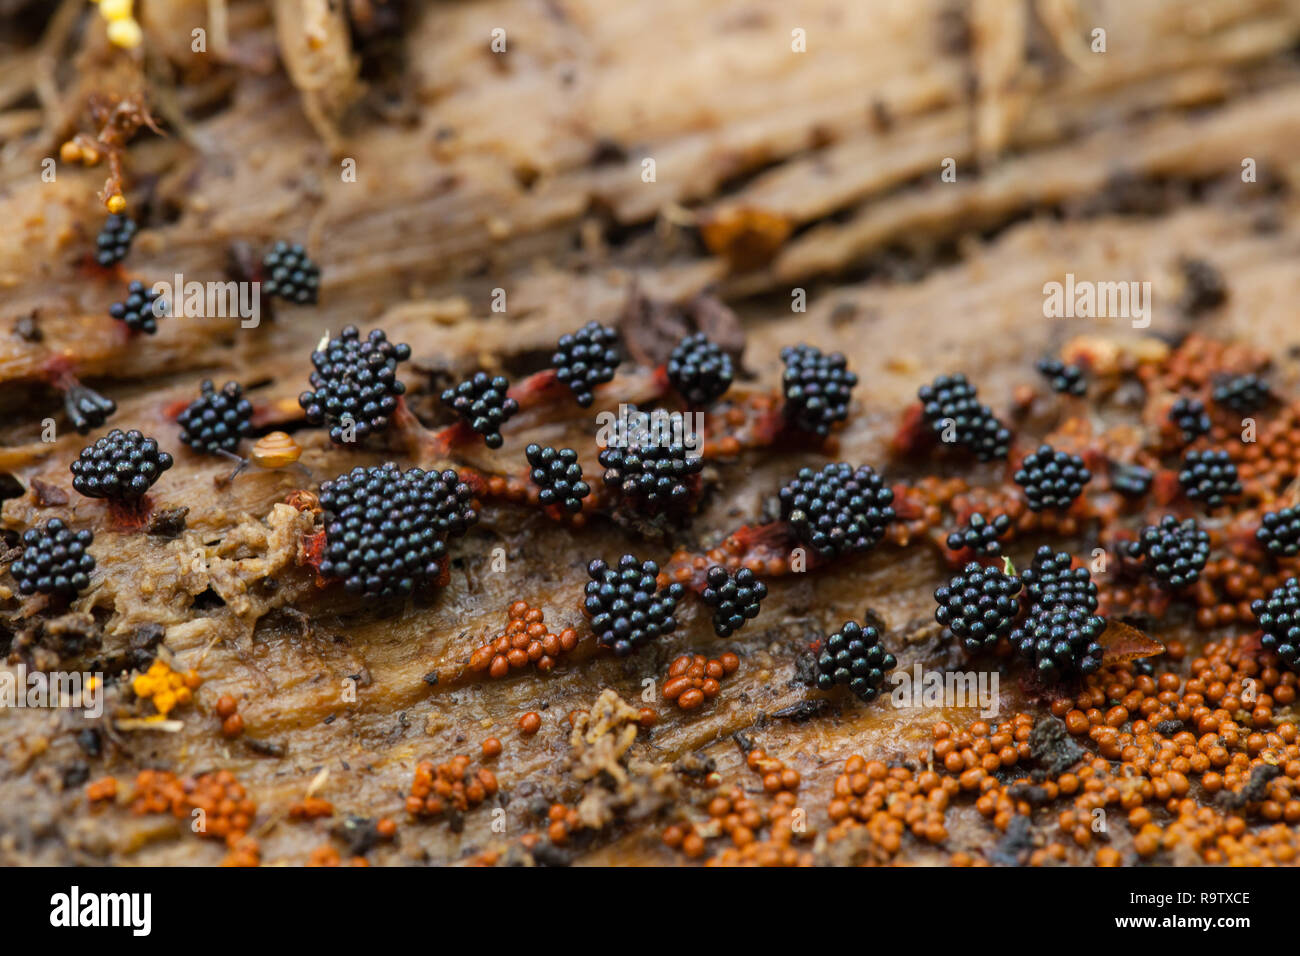 Different species of slime mould Stock Photo